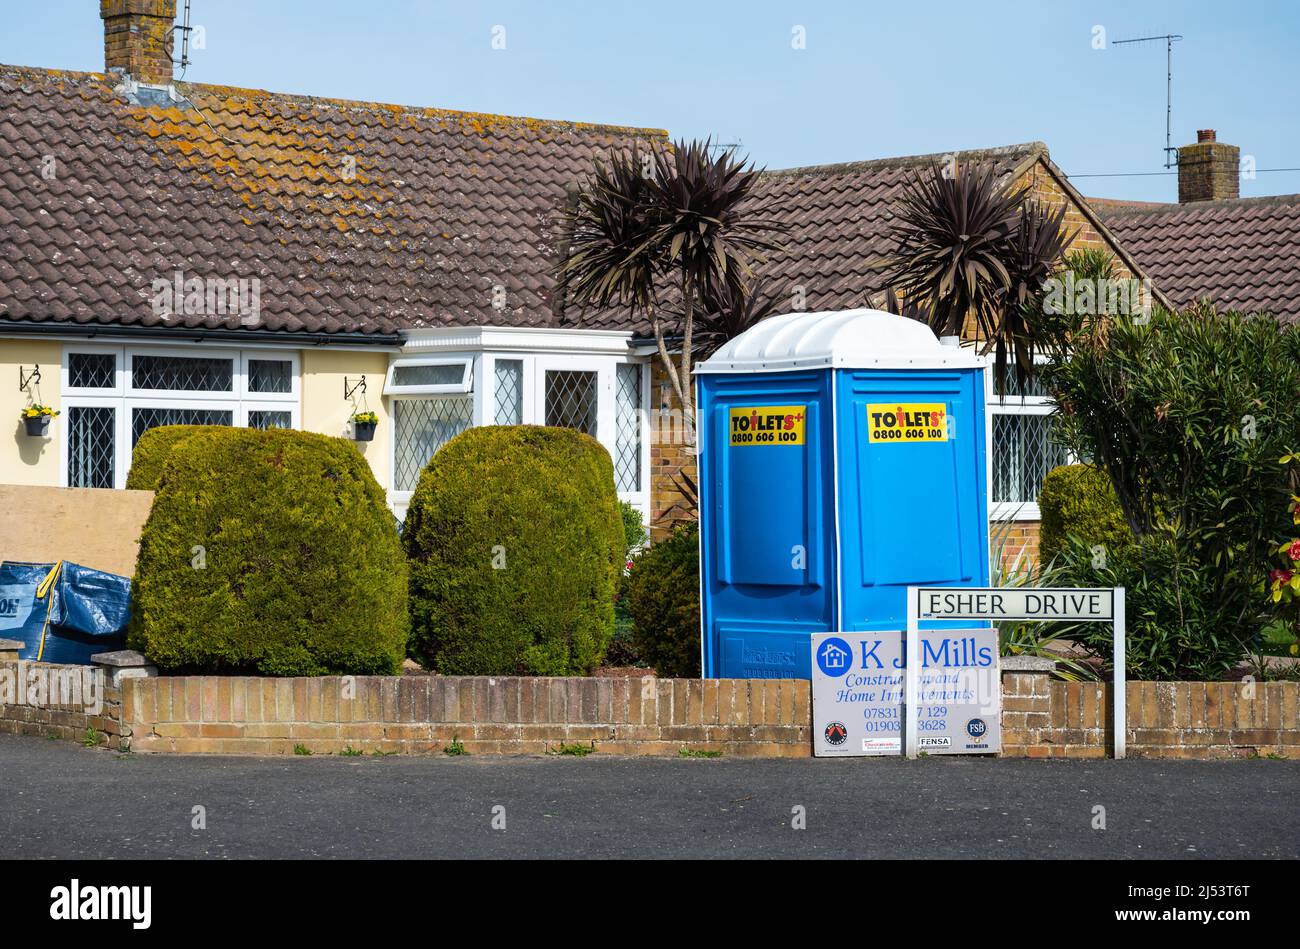 Porta Potty or Porta Potti, a portable toilet or loo outside a house undergoing construction for workers to use the toilet, in England, UK. Stock Photo